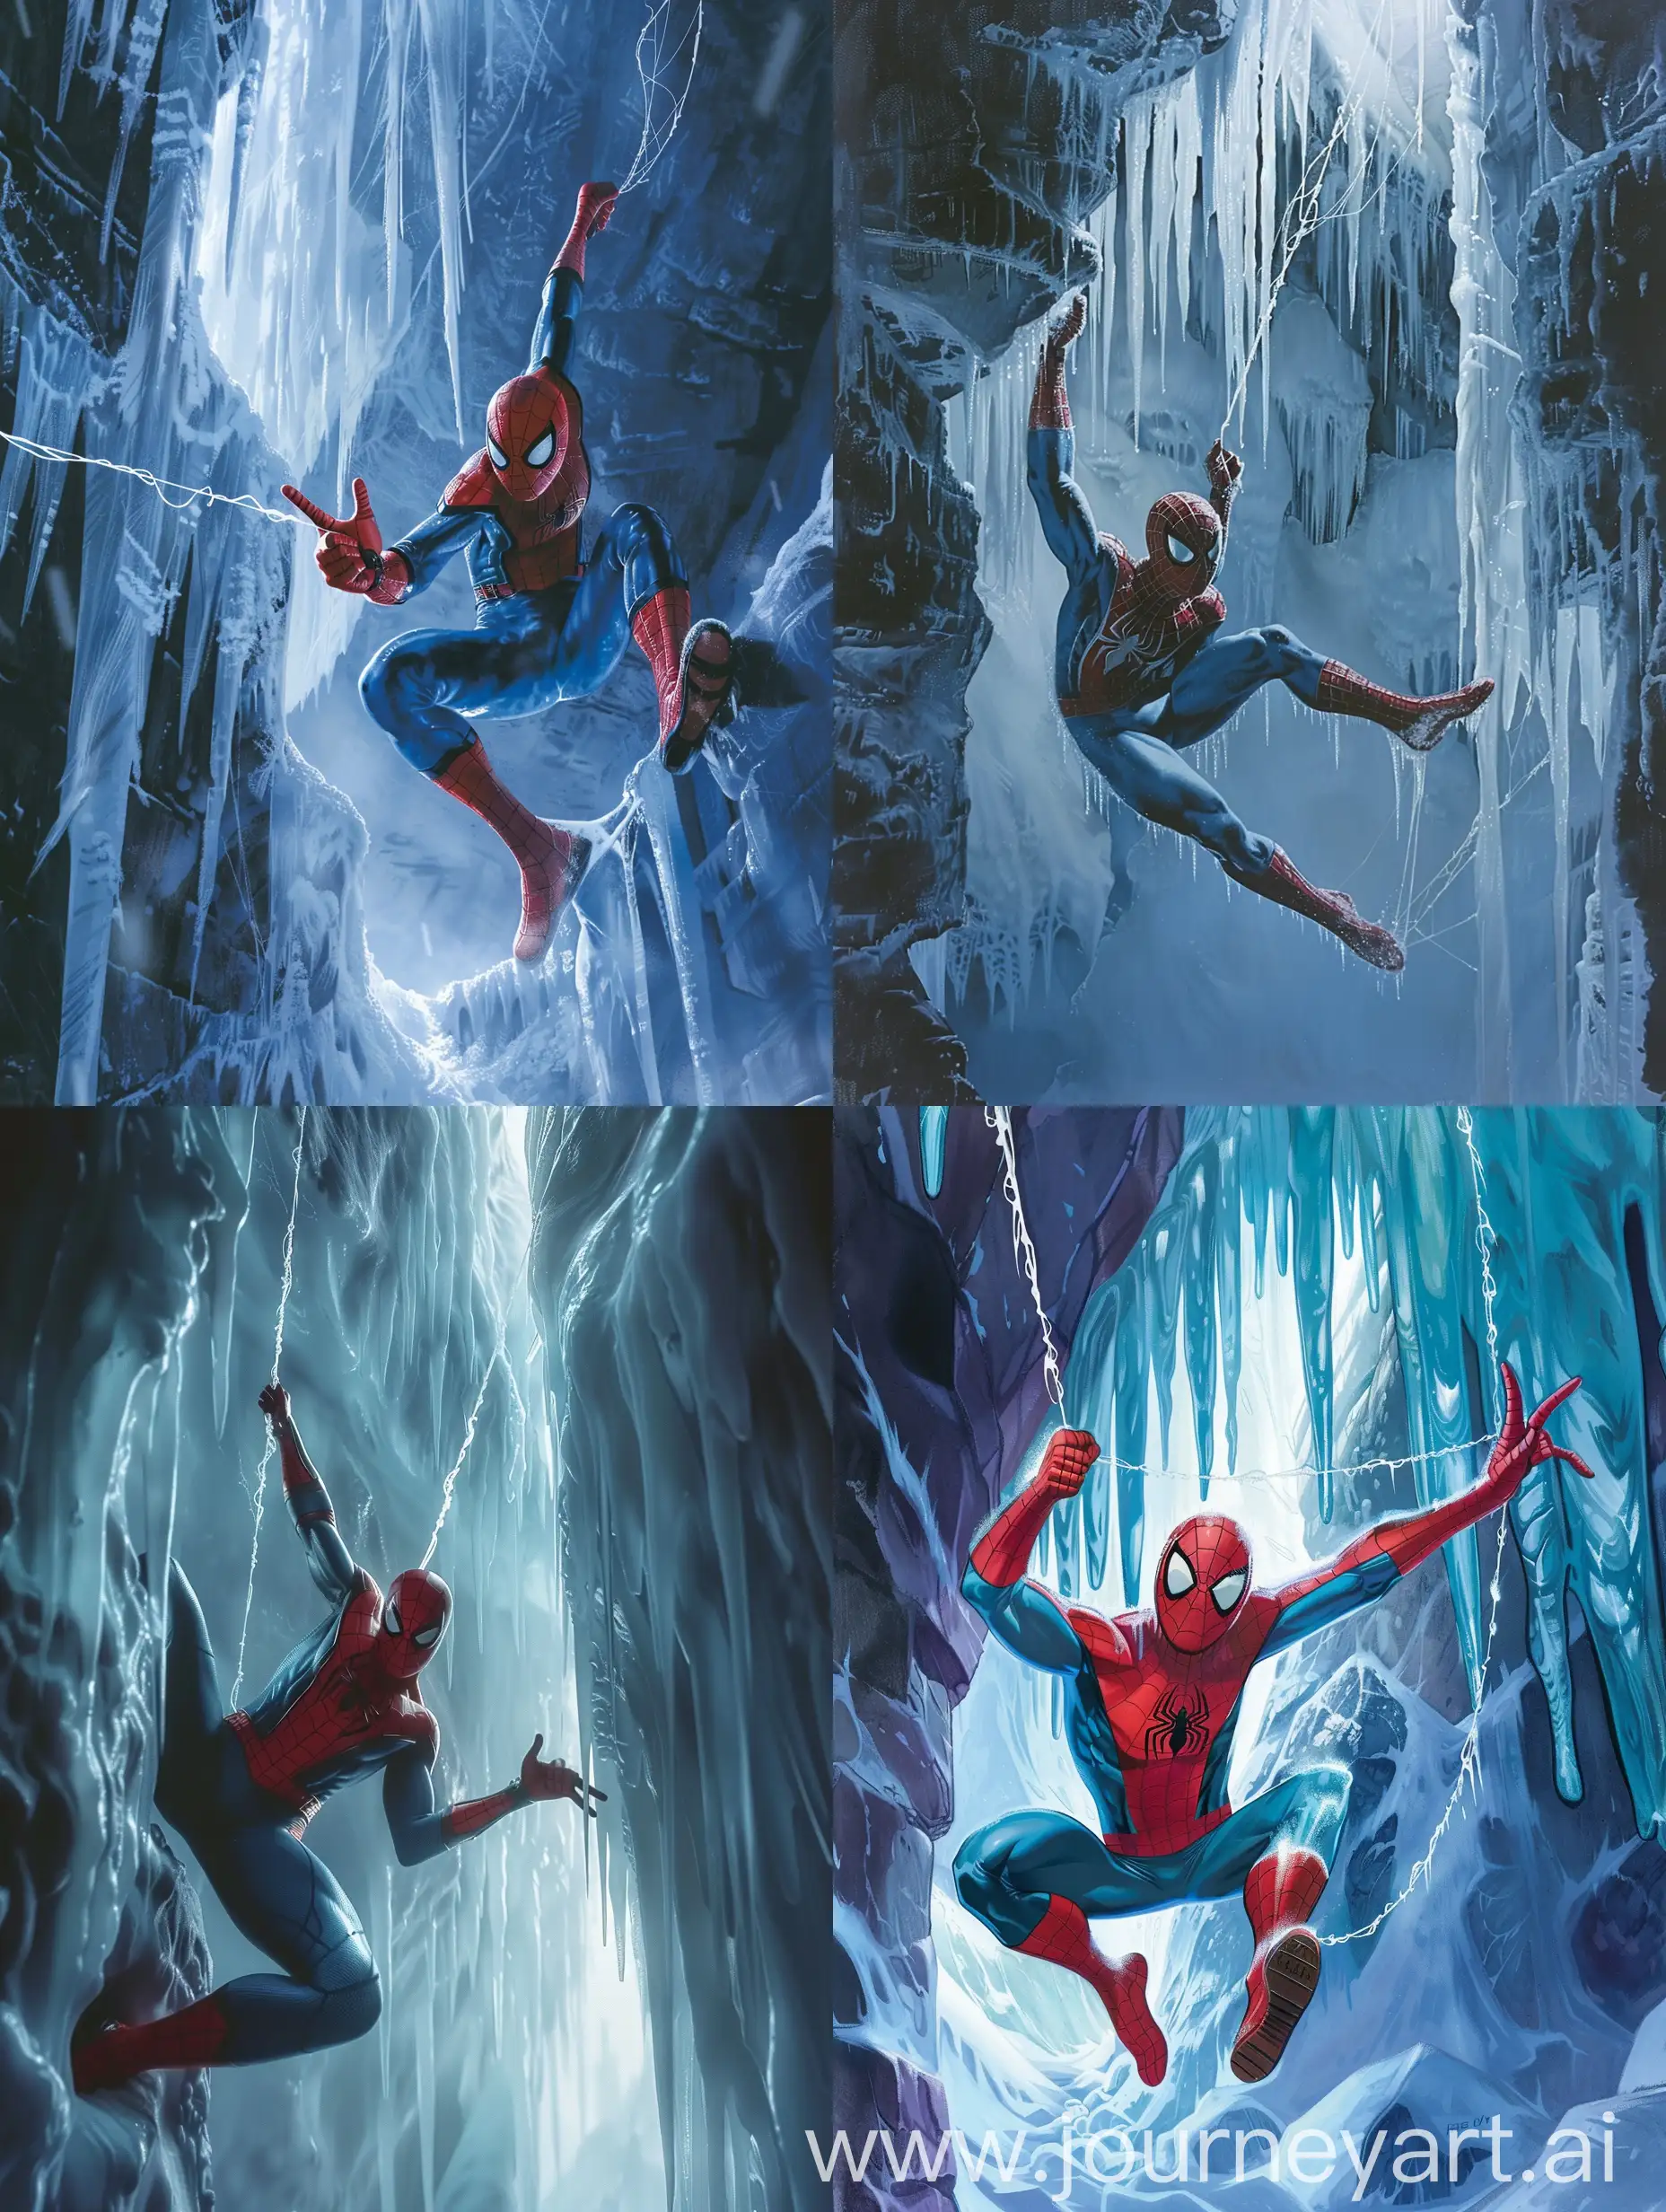 spider man, hanging in a spider thread inside an icy room, the ice covers the walls and the floor and the ceiling